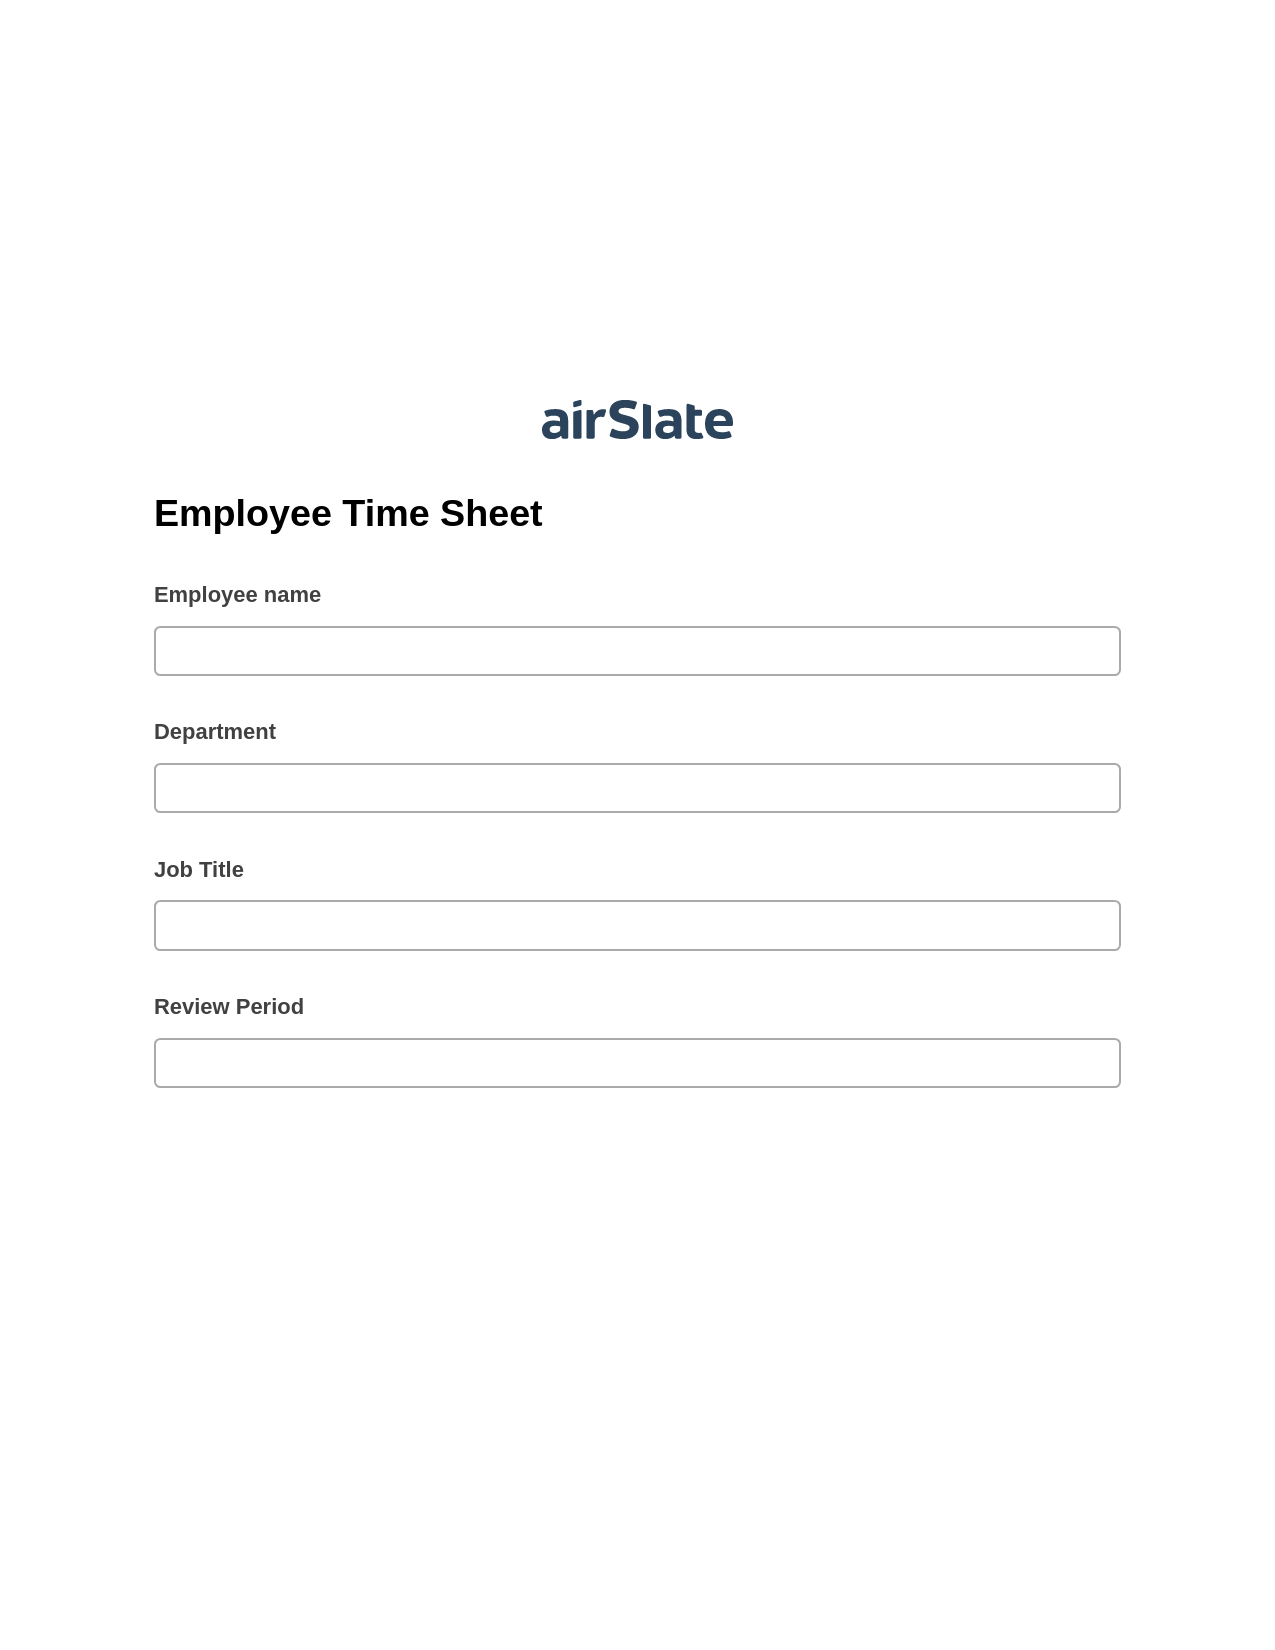 Multirole Employee Time Sheet Pre-fill from Salesforce Records Bot, Create slate from another Flow Bot, Export to MySQL Bot